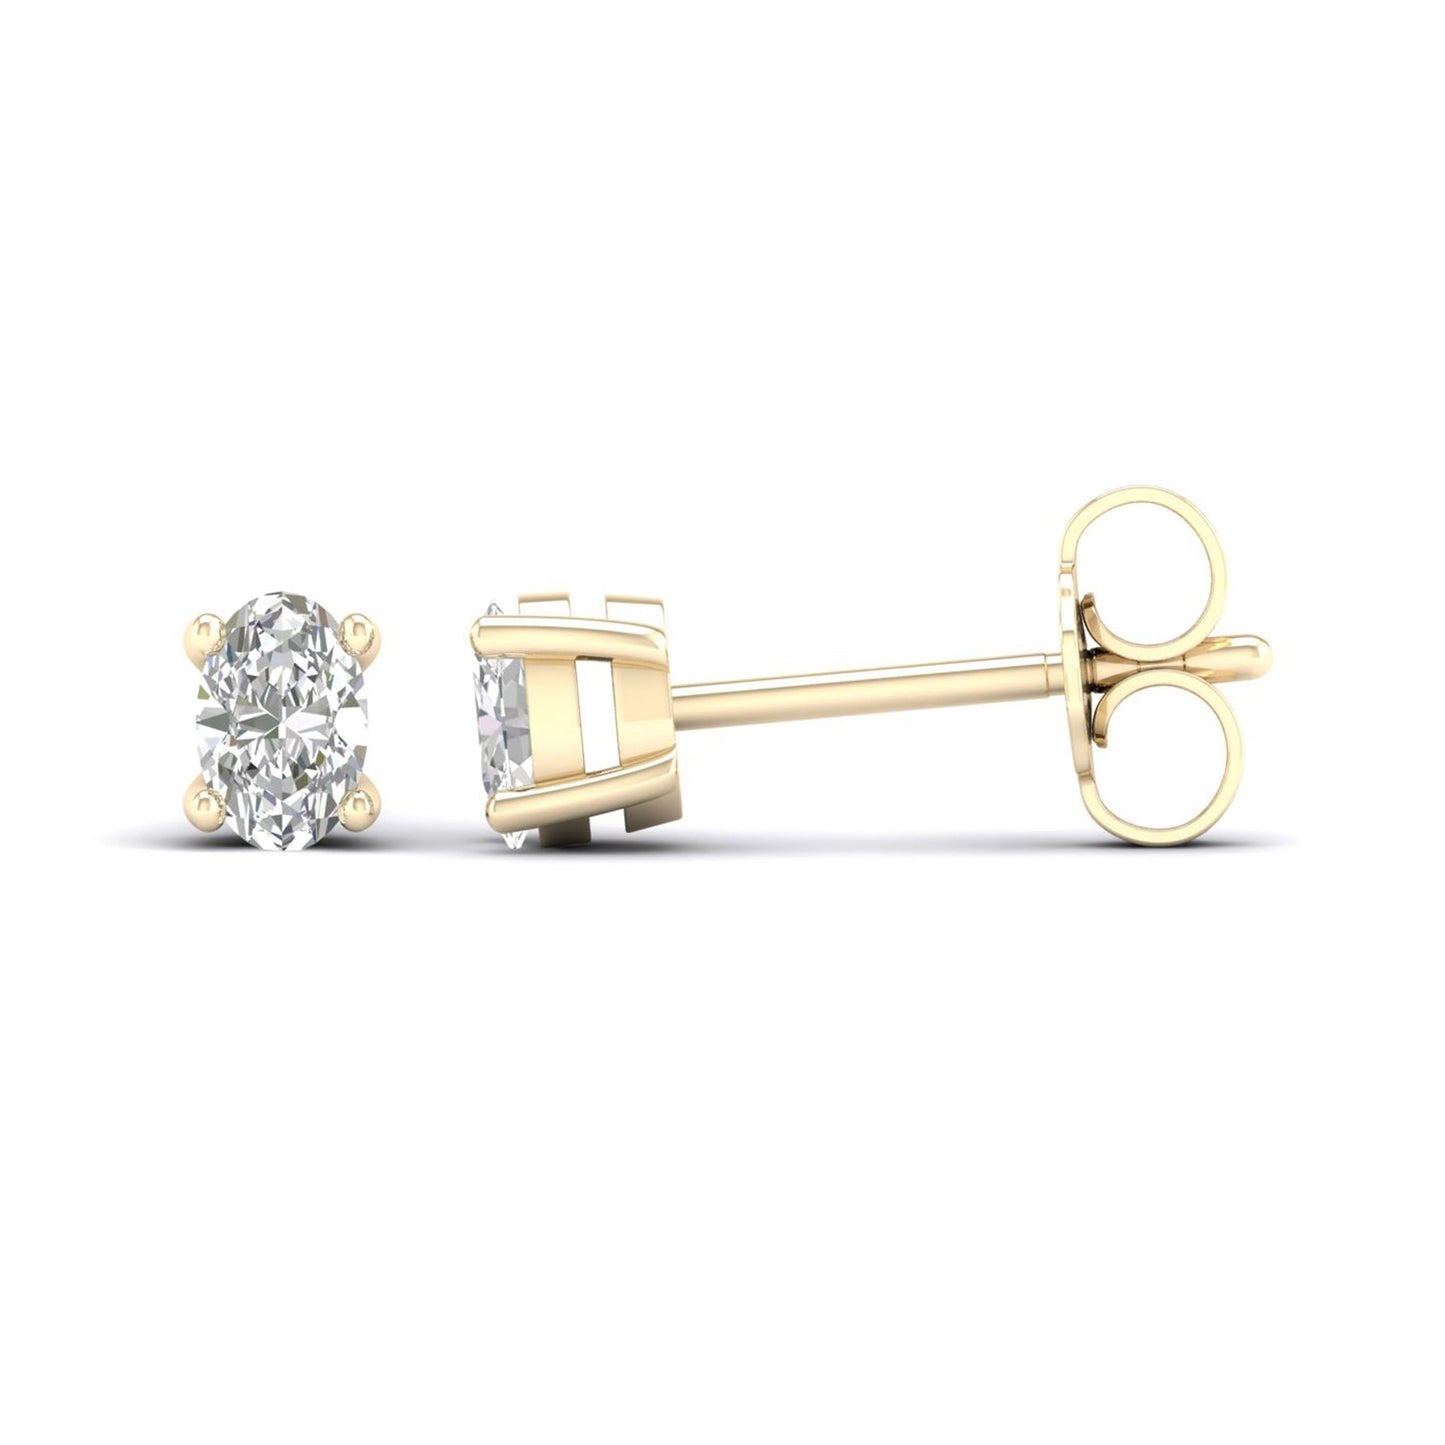 Ellipse Solitaire Studs_Product Angle_PCP Main Image